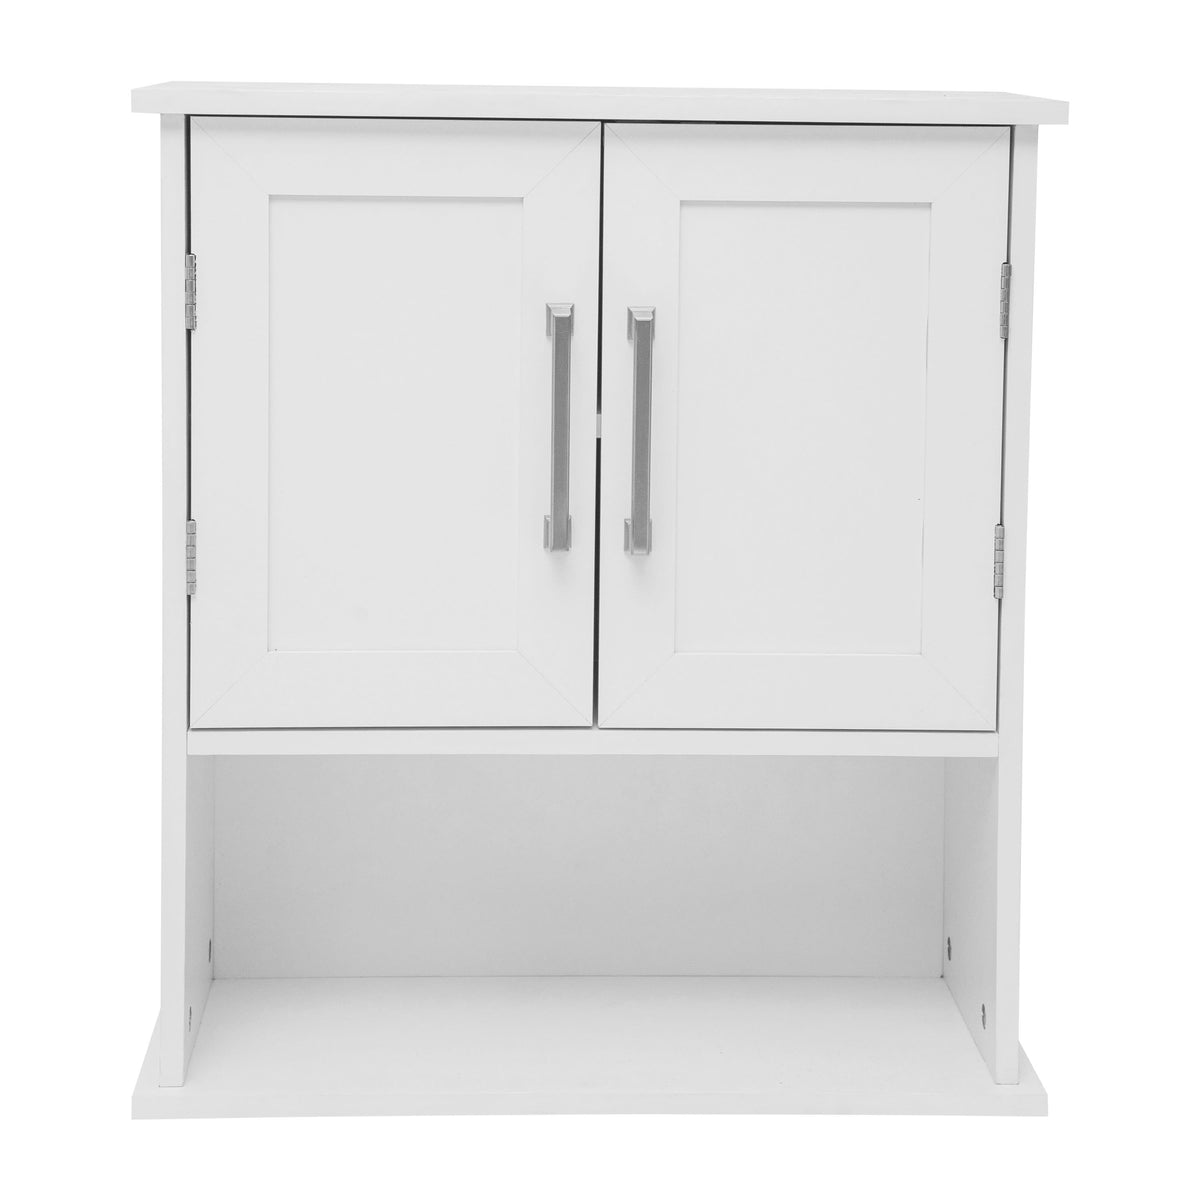 White |#| Modern Bathroom Wall Mount Medicine Cabinet with Magnetic Close Doors in White